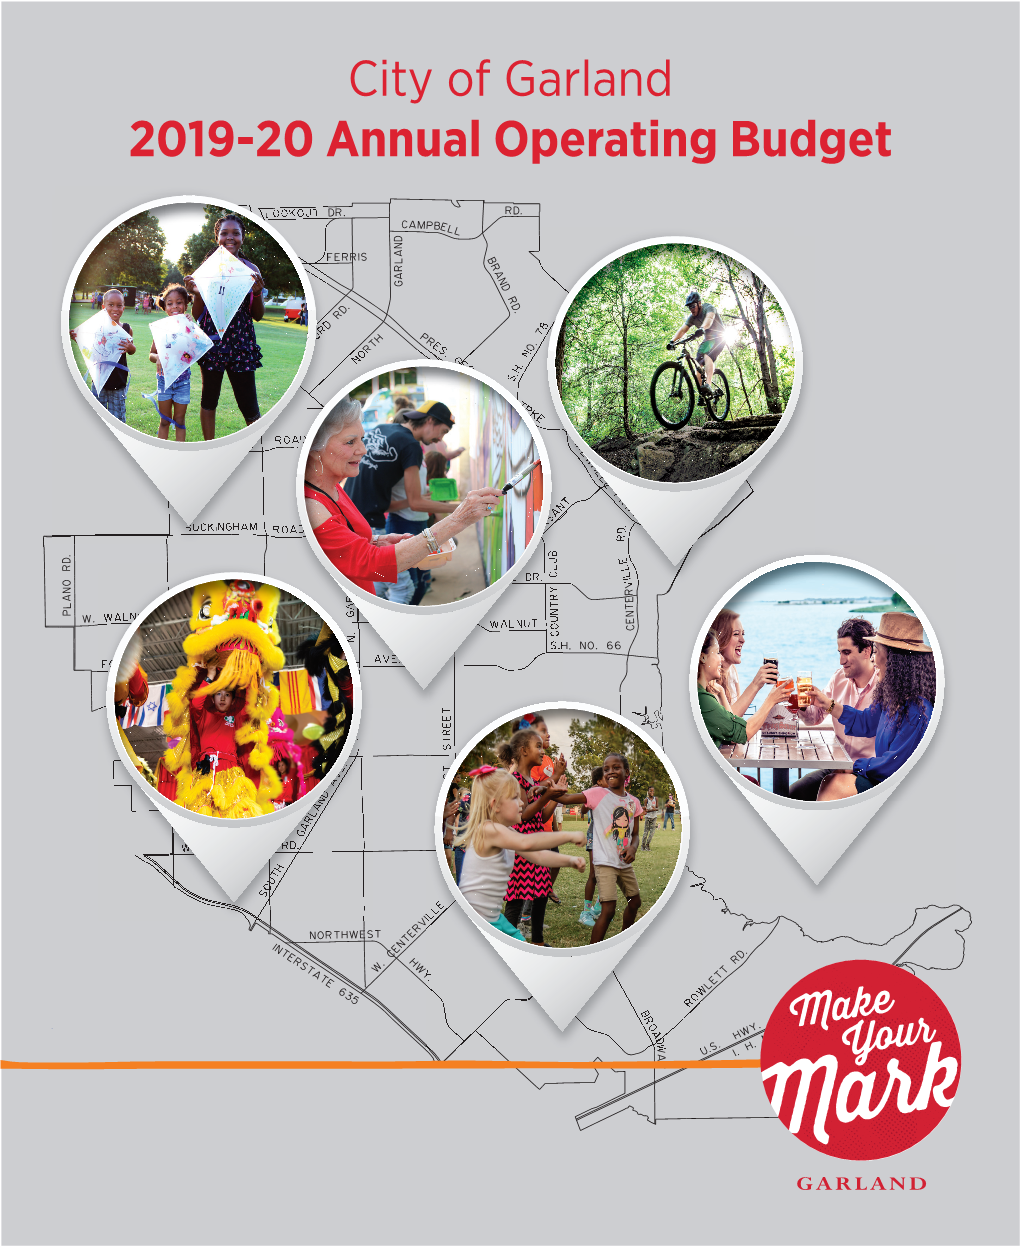 City of Garland 2019-20 Annual Operating Budget